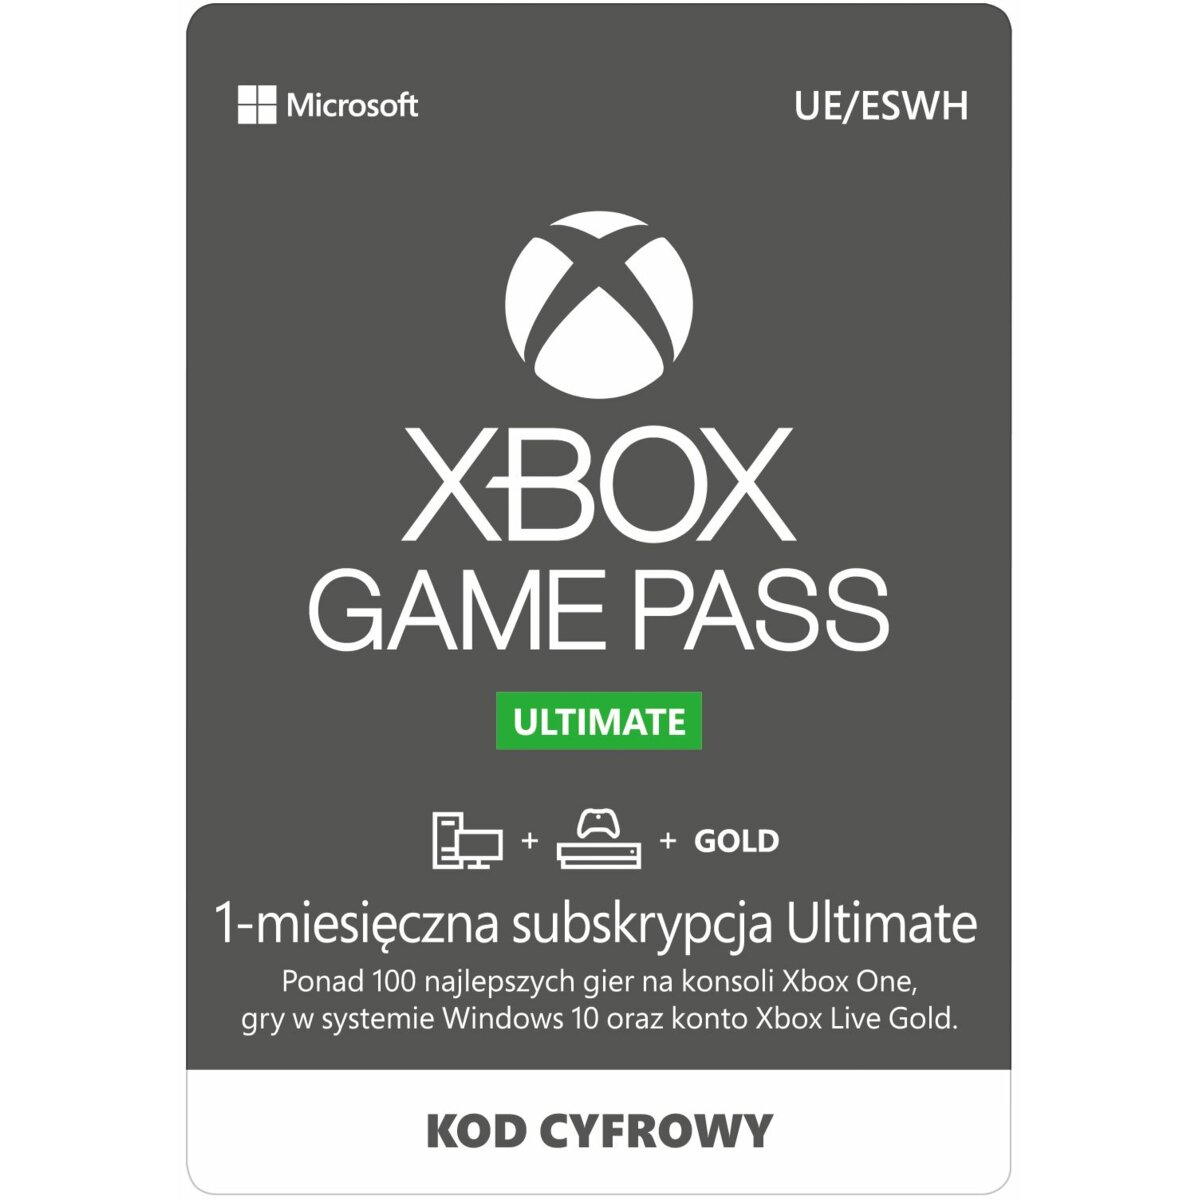 how to cancel xbox game pass ultimate subscription